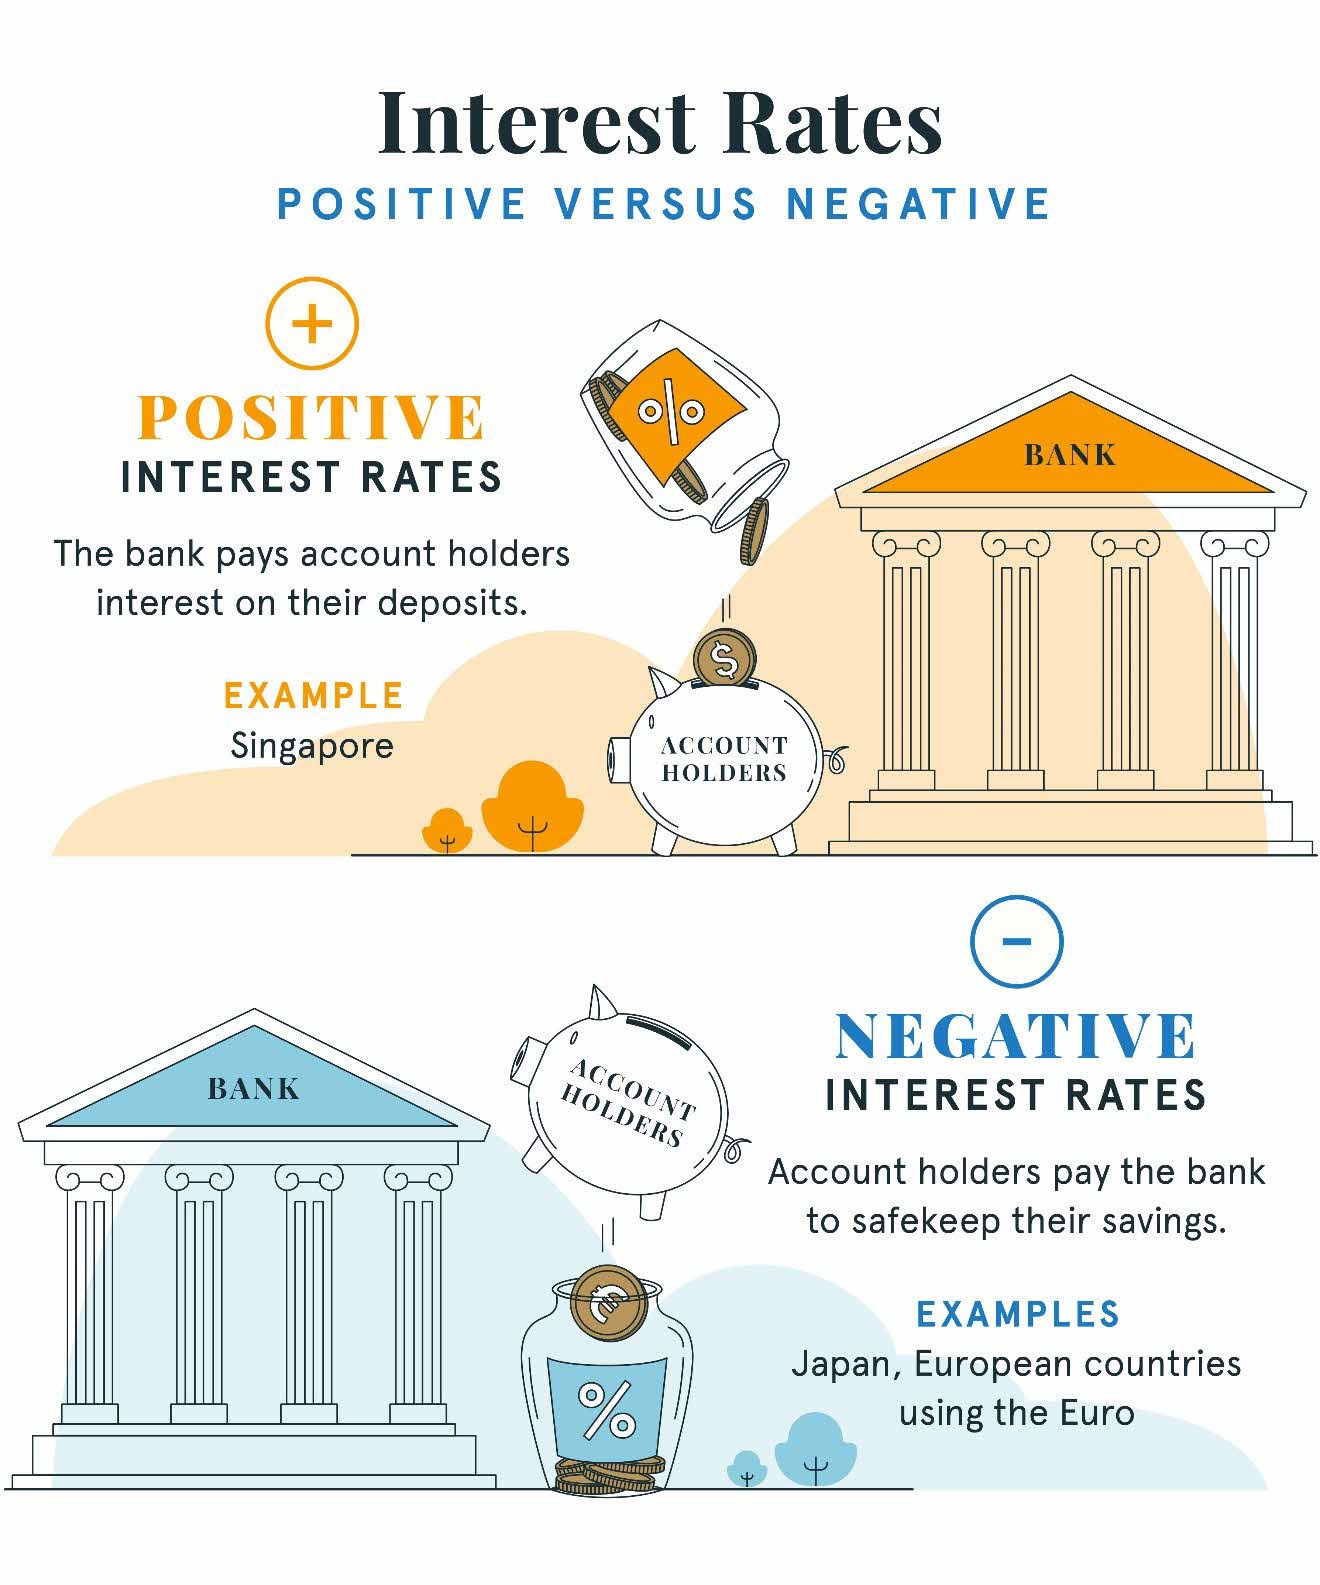 Implications of positive interest rates and negative interest rates